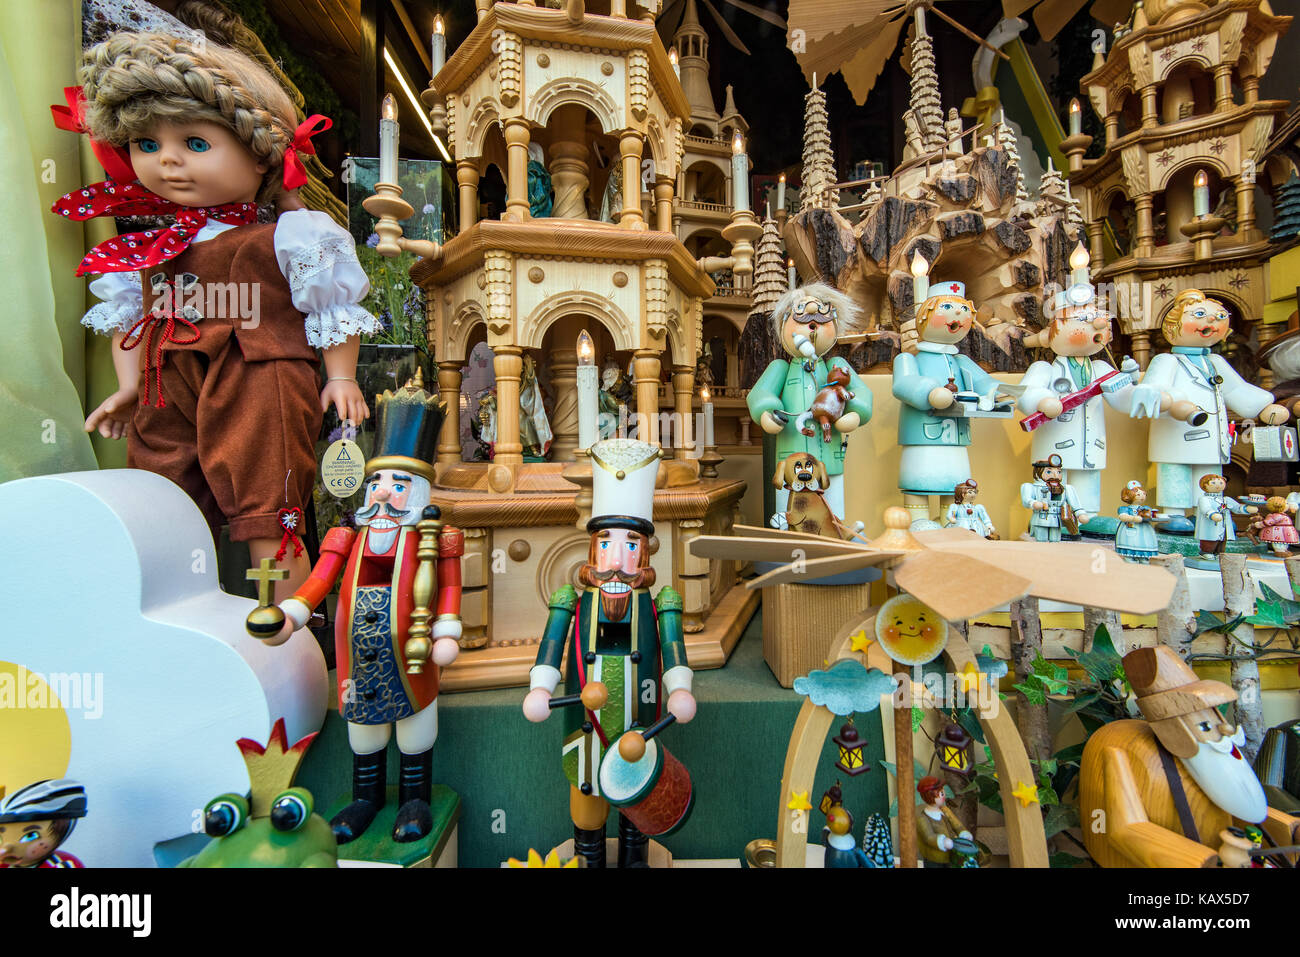 Porcelain doll and more toys on display in a shop window, Rothenburg ob der Tauber, Bavaria, Germany Stock Photo